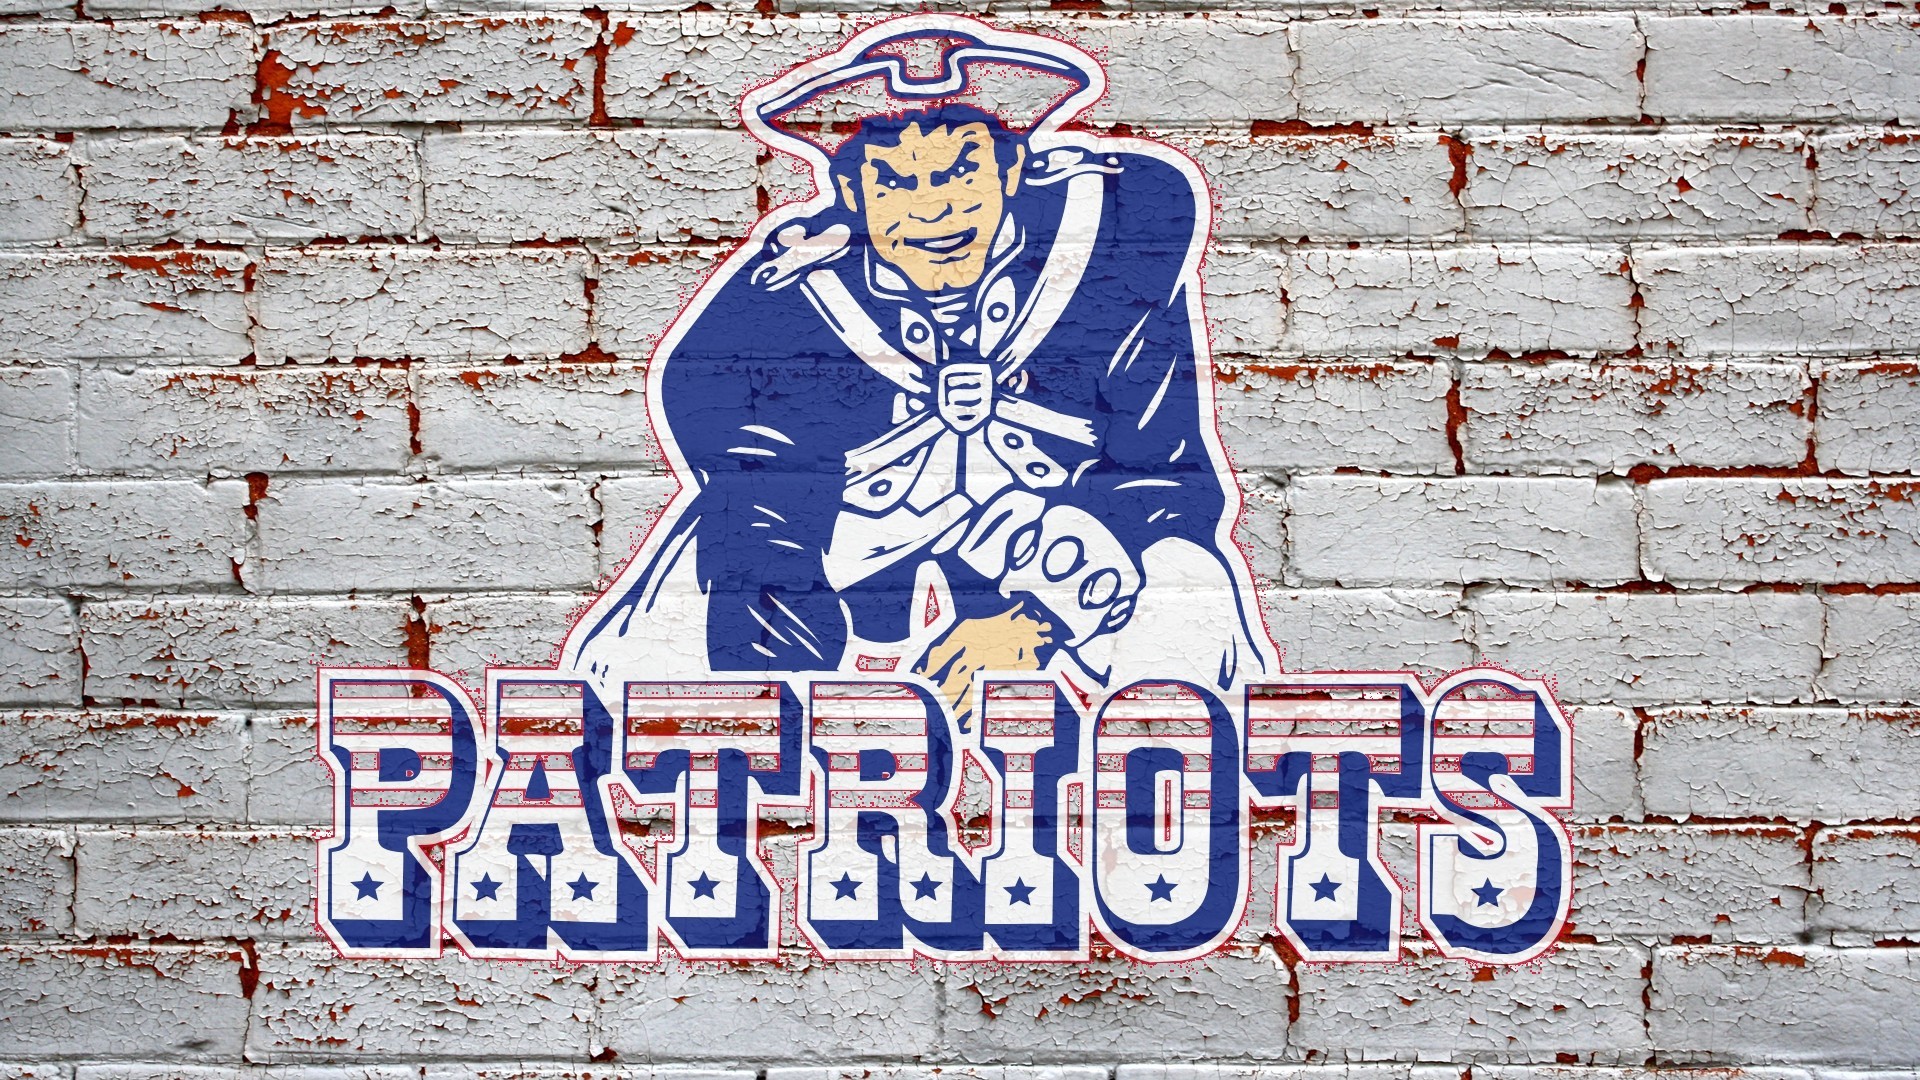 Made a New England Patriots Mobile Wallpaper Tell Me What You